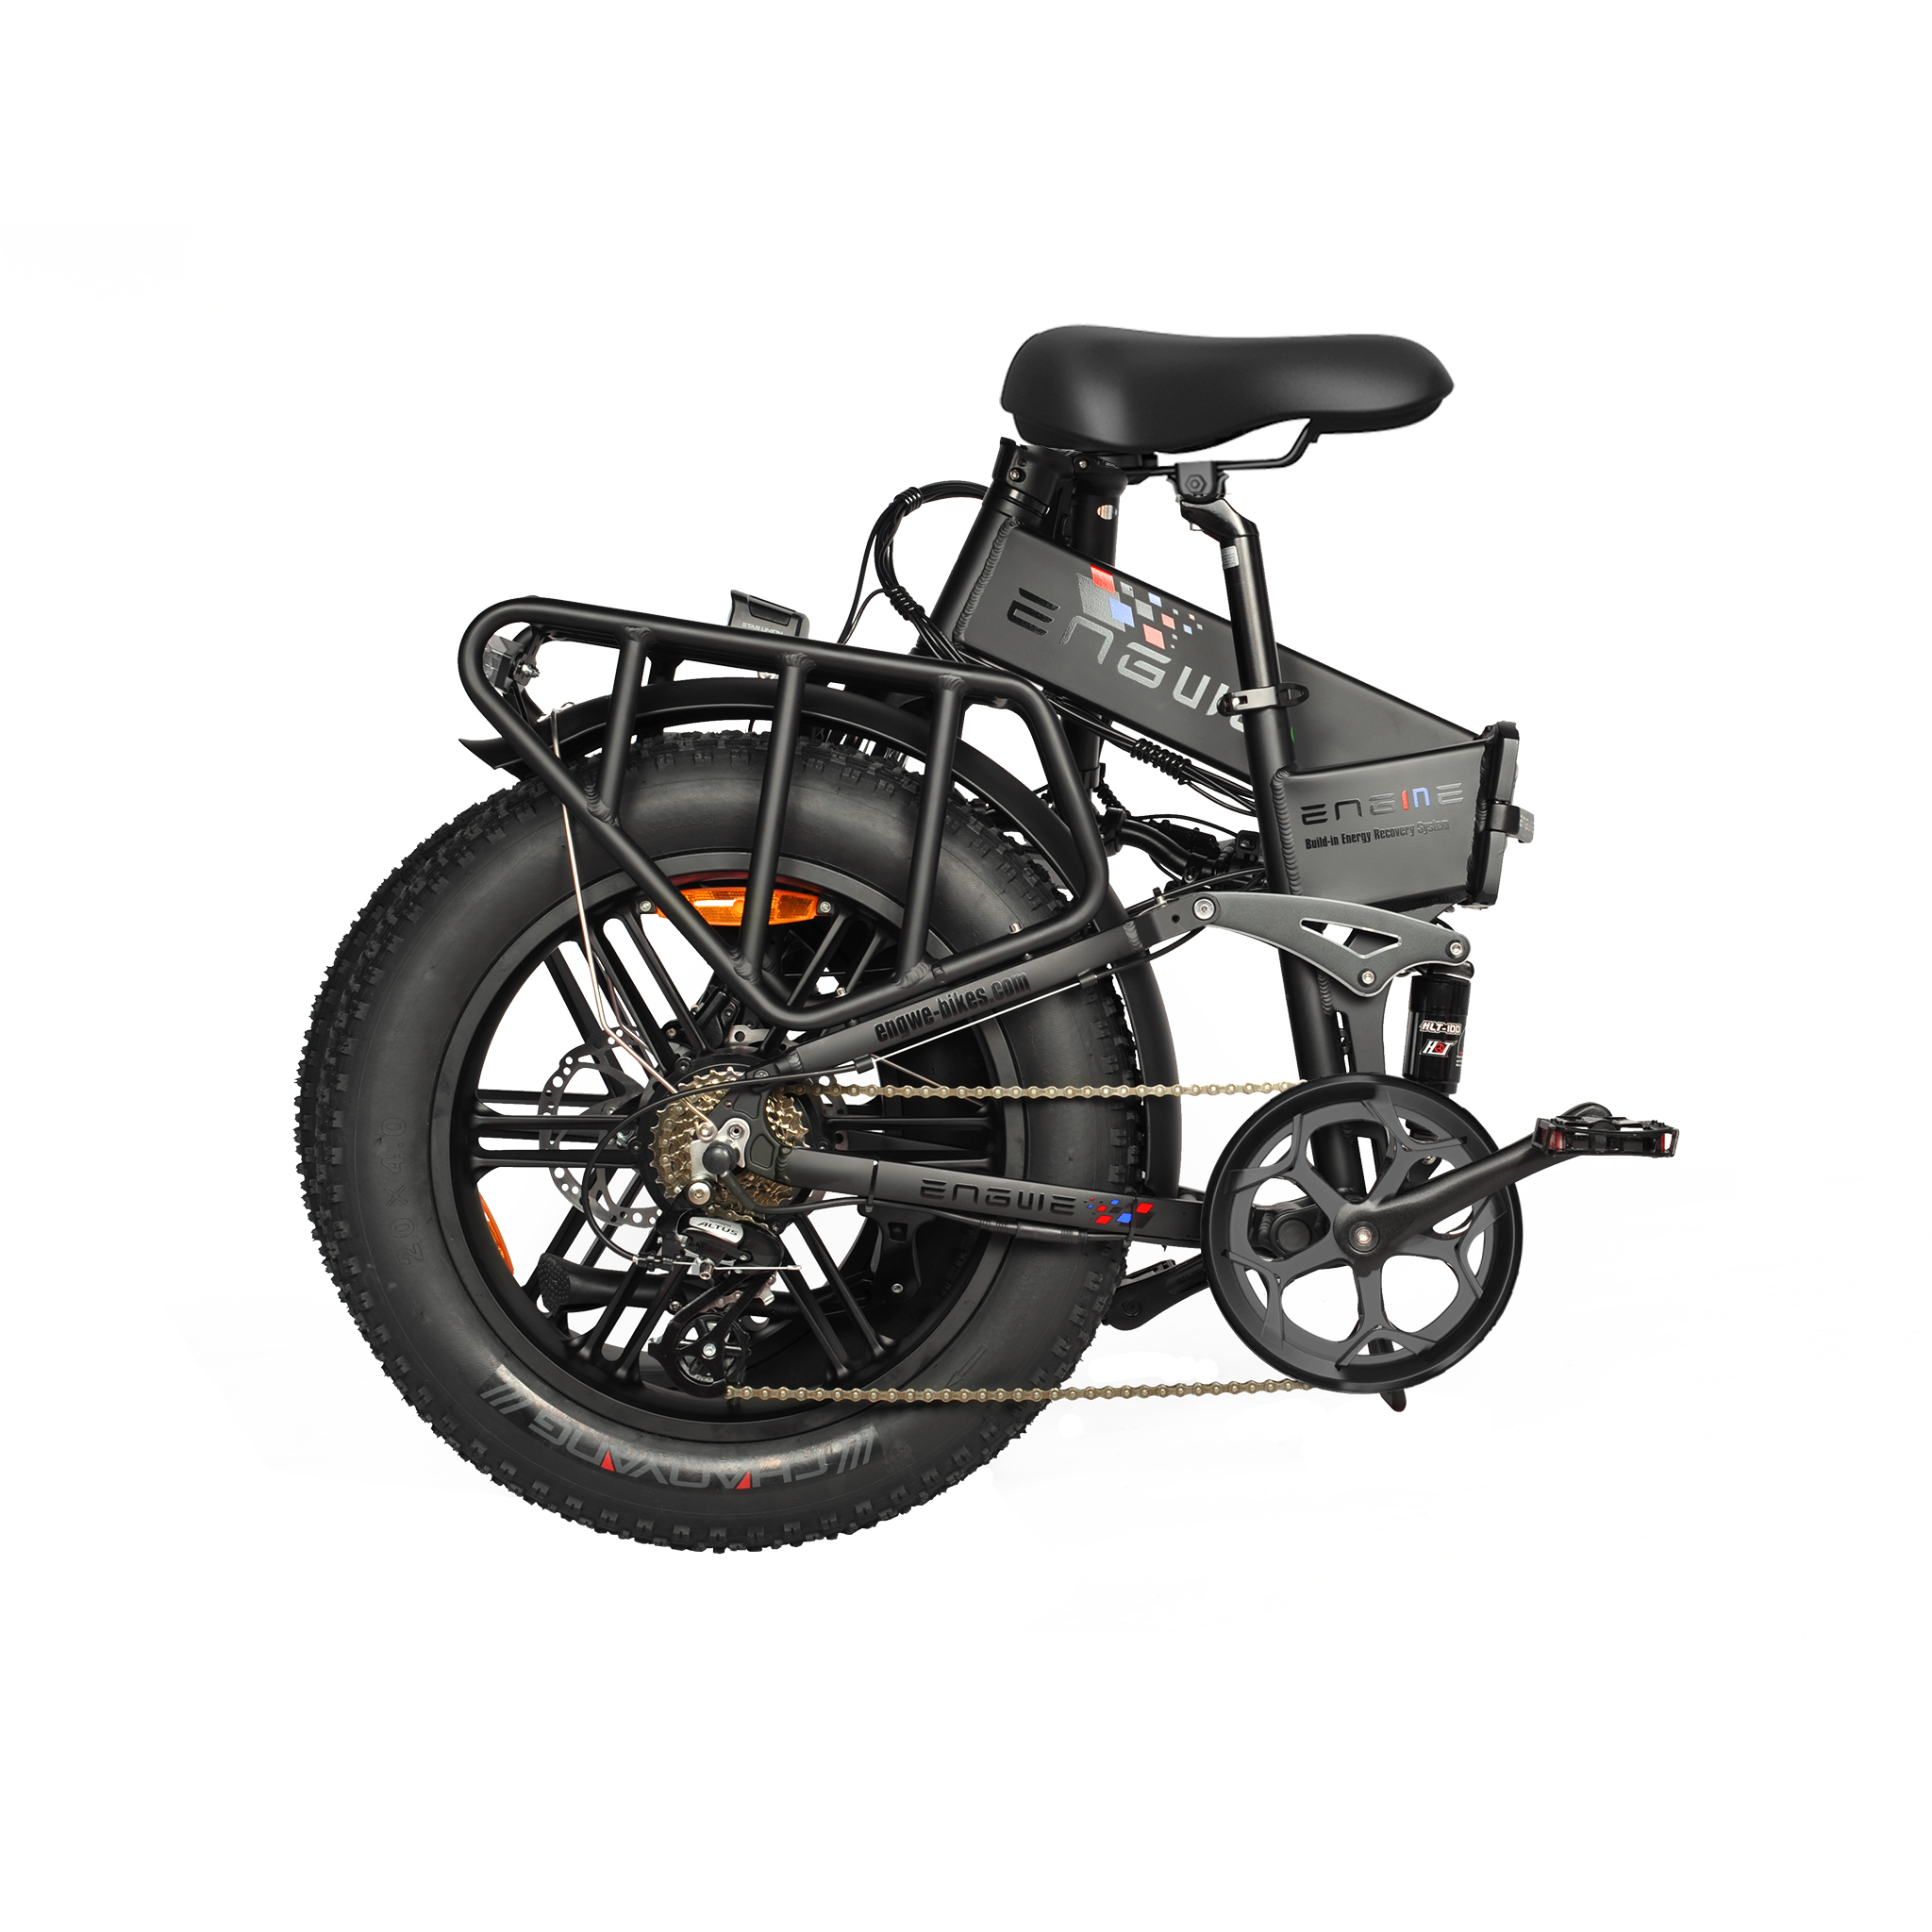 ENGWE ENGINE Pro Upgrade Version Electric Bicycle 20inch Fat Tire 750W Brushless Motor 48V 16Ah Battery  8 Speed System